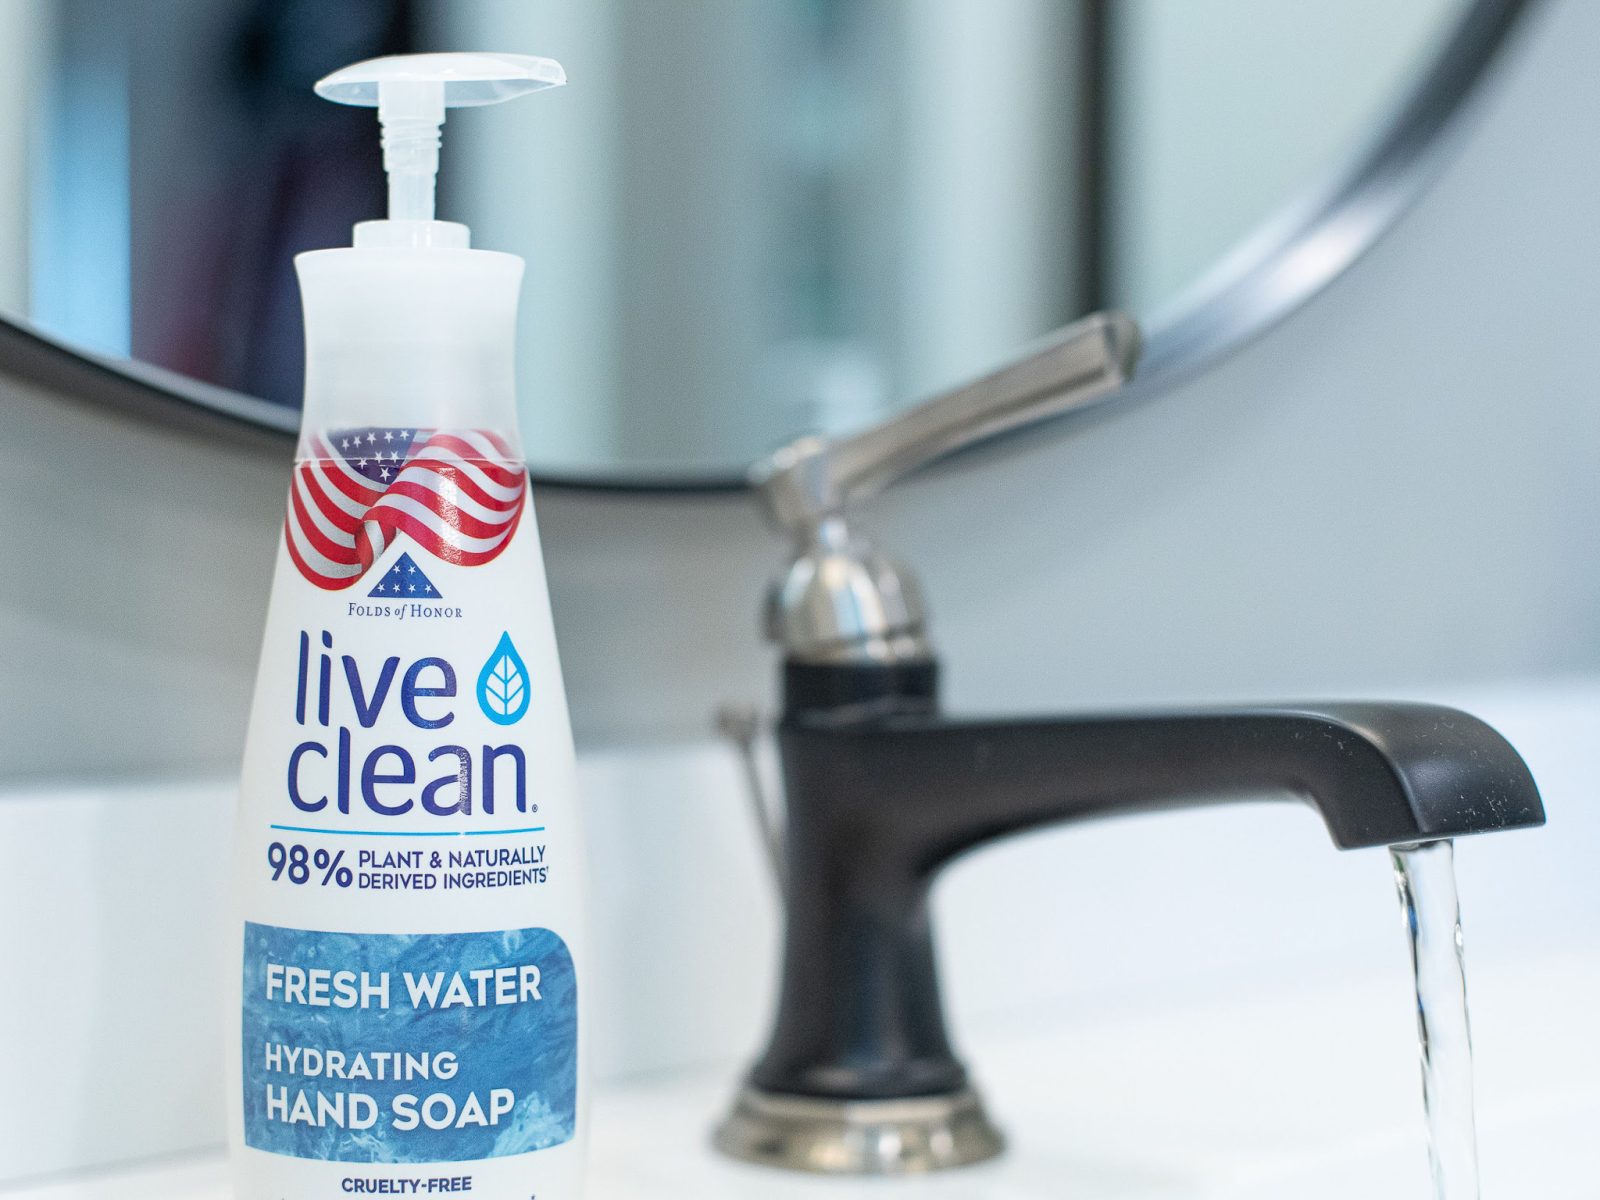 Stay Happy And Healthy With Live Clean Products – Buy One, Get One FREE At Publix